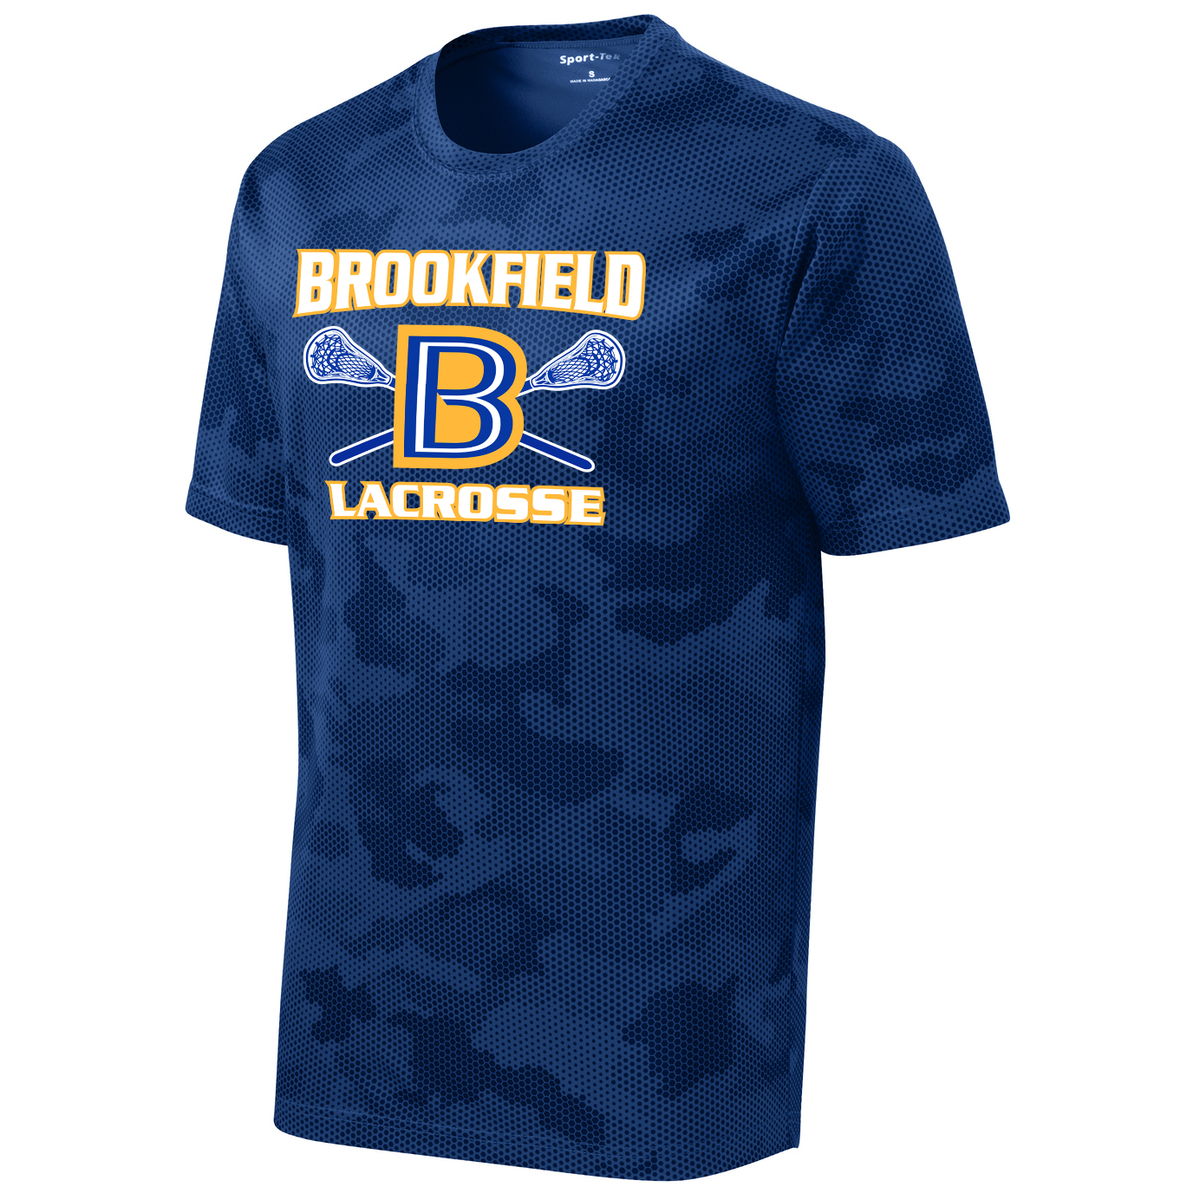 Brookfield Lacrosse Youth CamoHex Tee